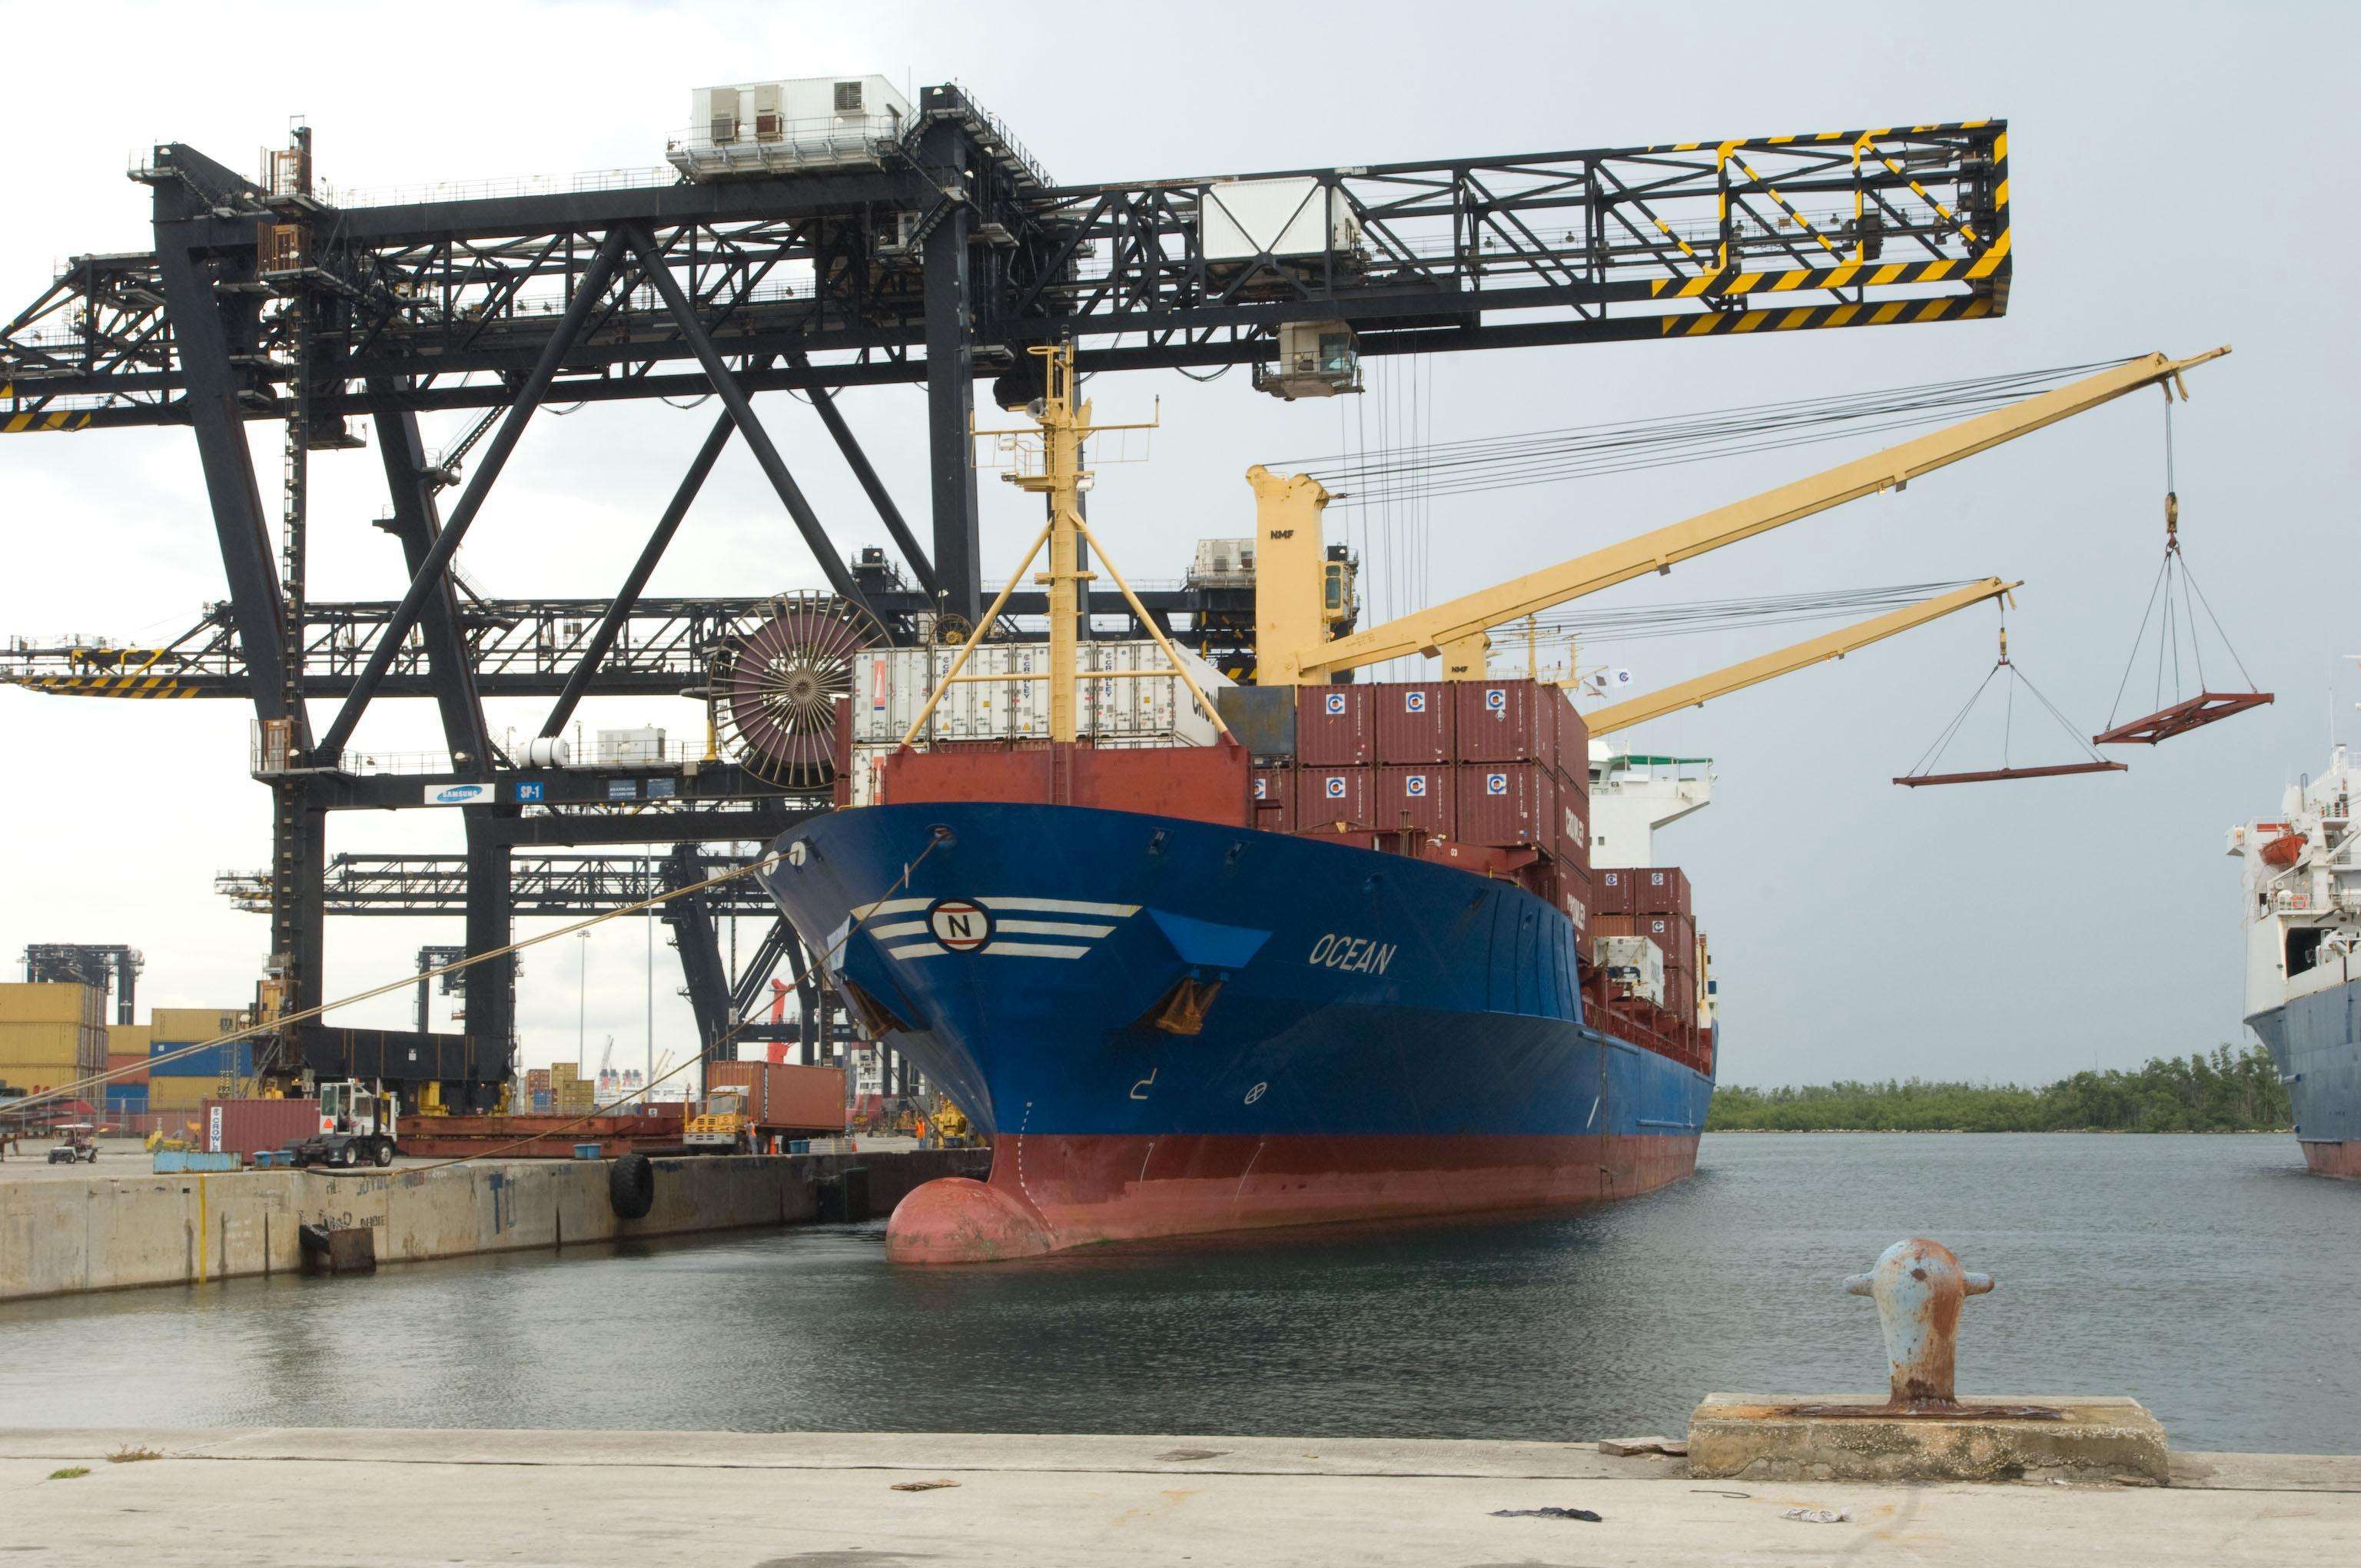 Blue cargo ship docked with cargo containers on deck